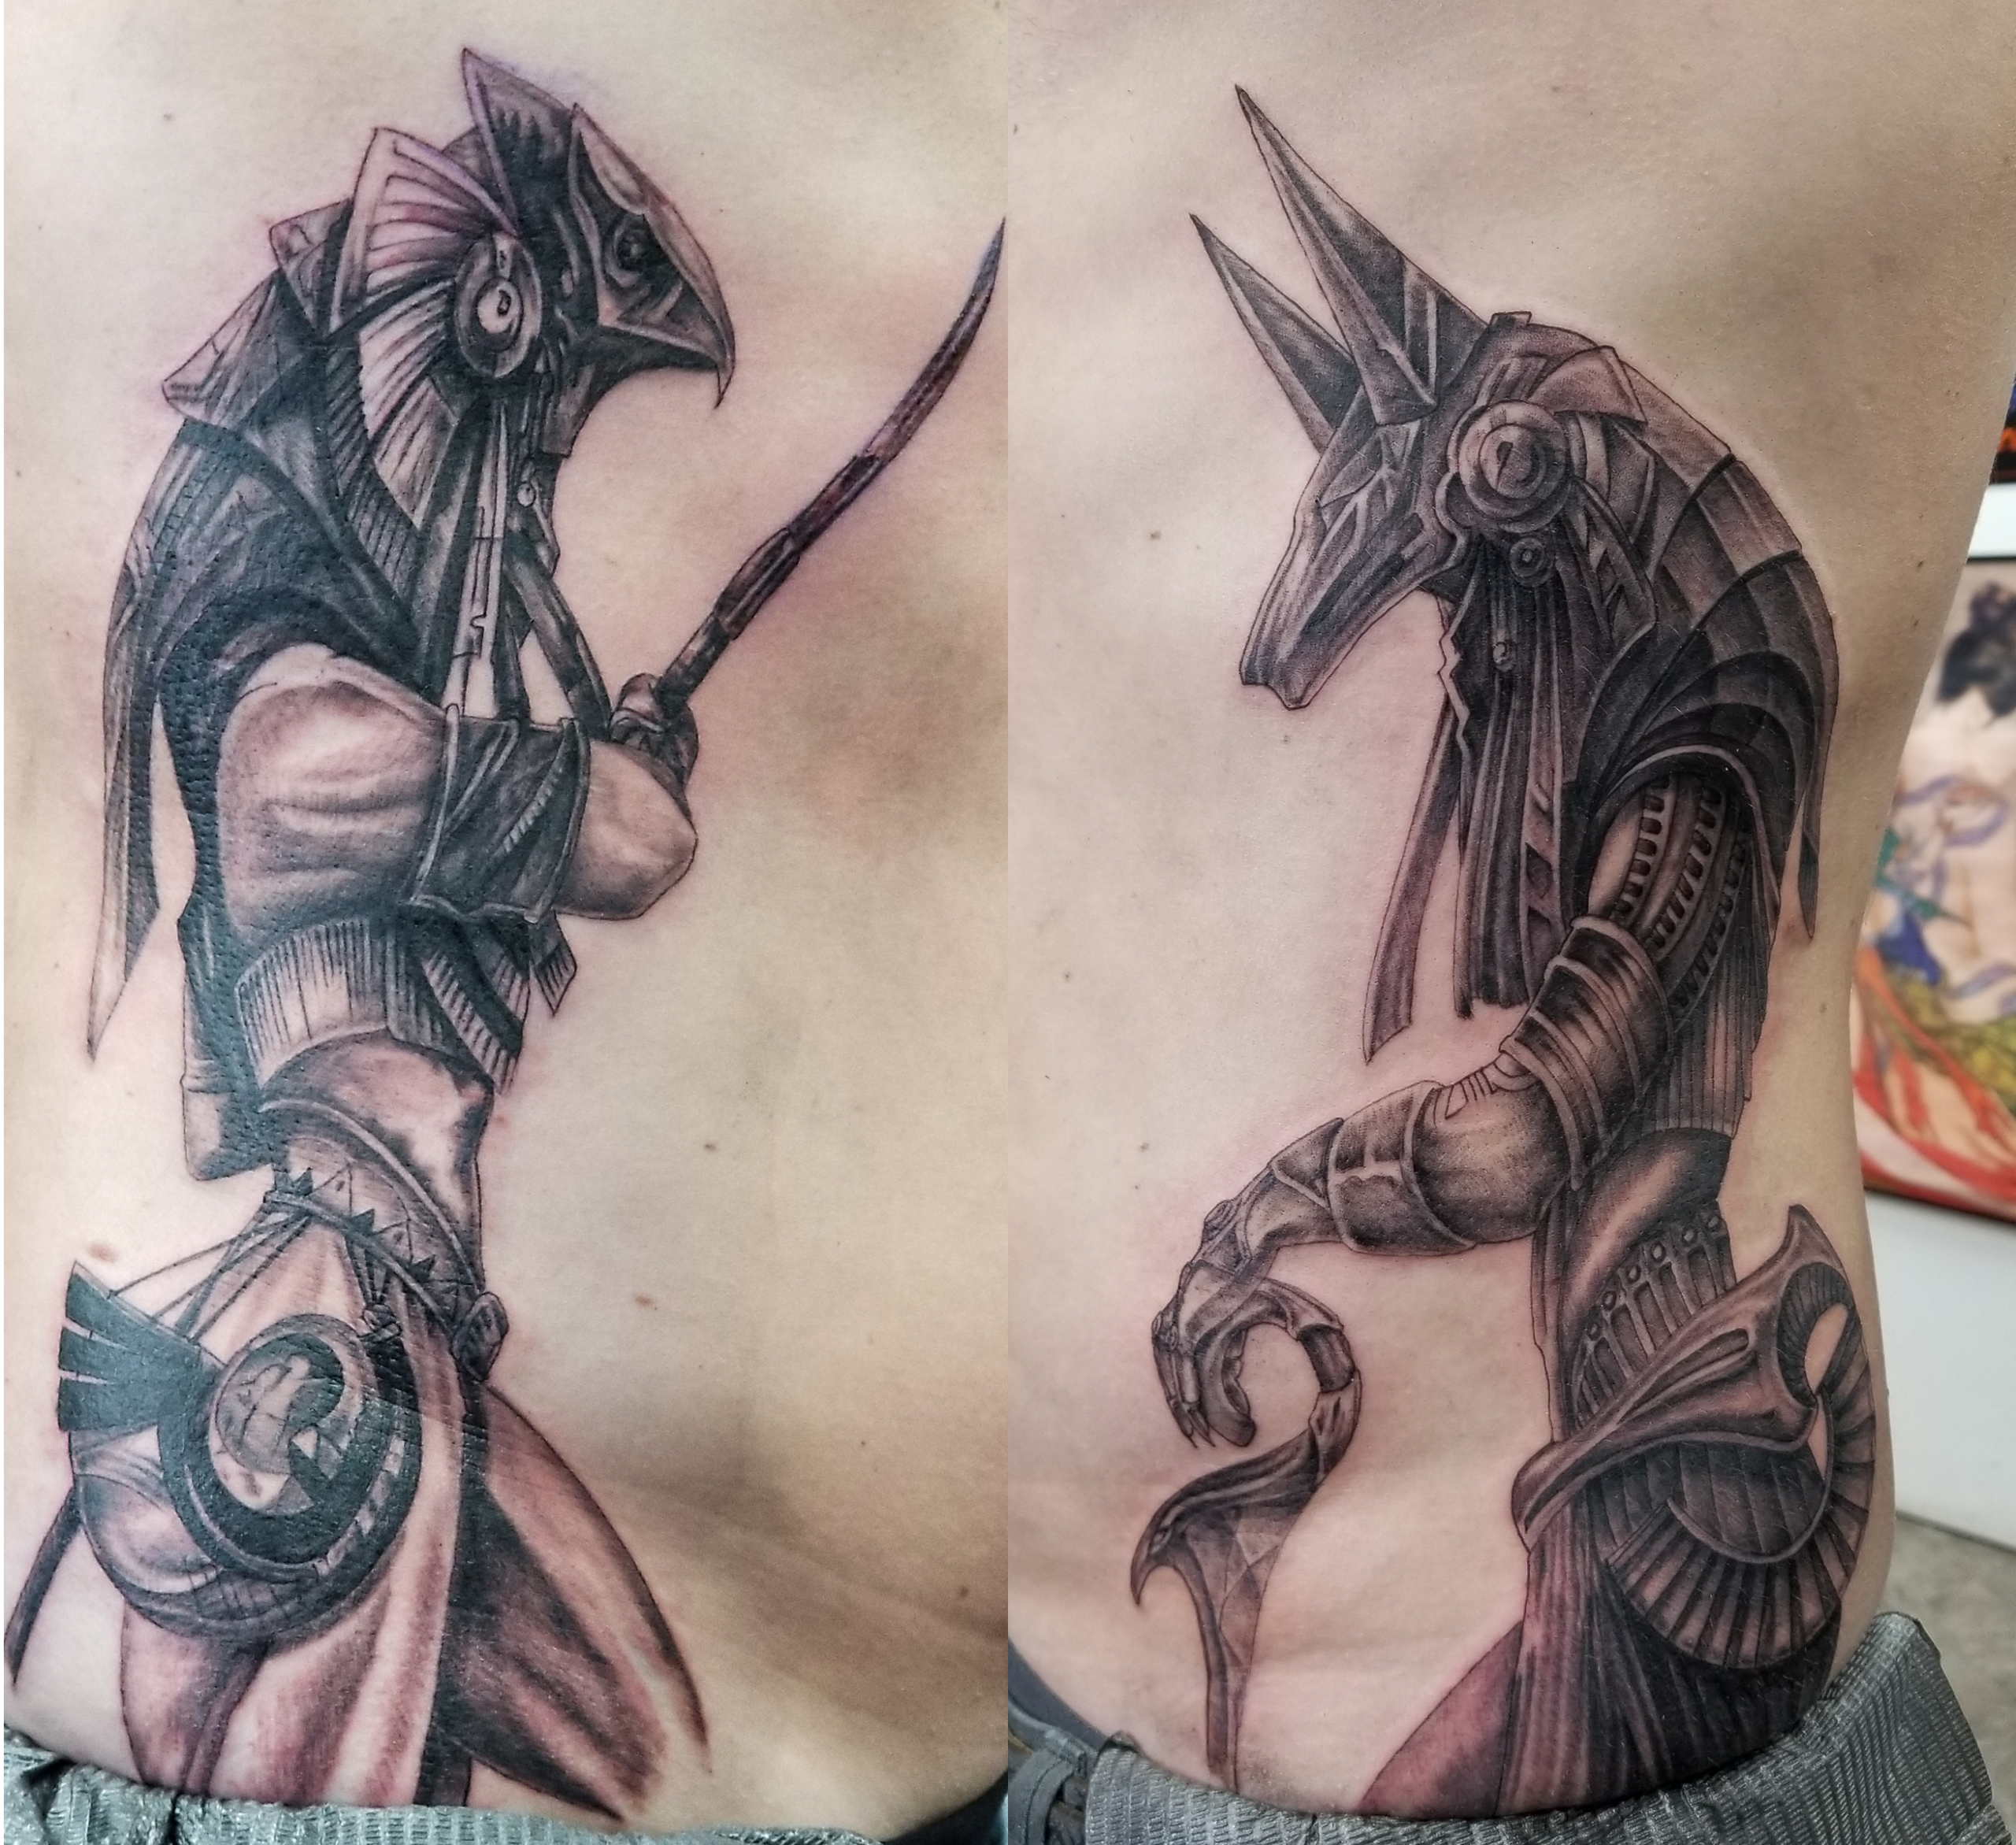 Egyptian gods Ra and Anubis in realistic black and grey tattoos on the ribs.